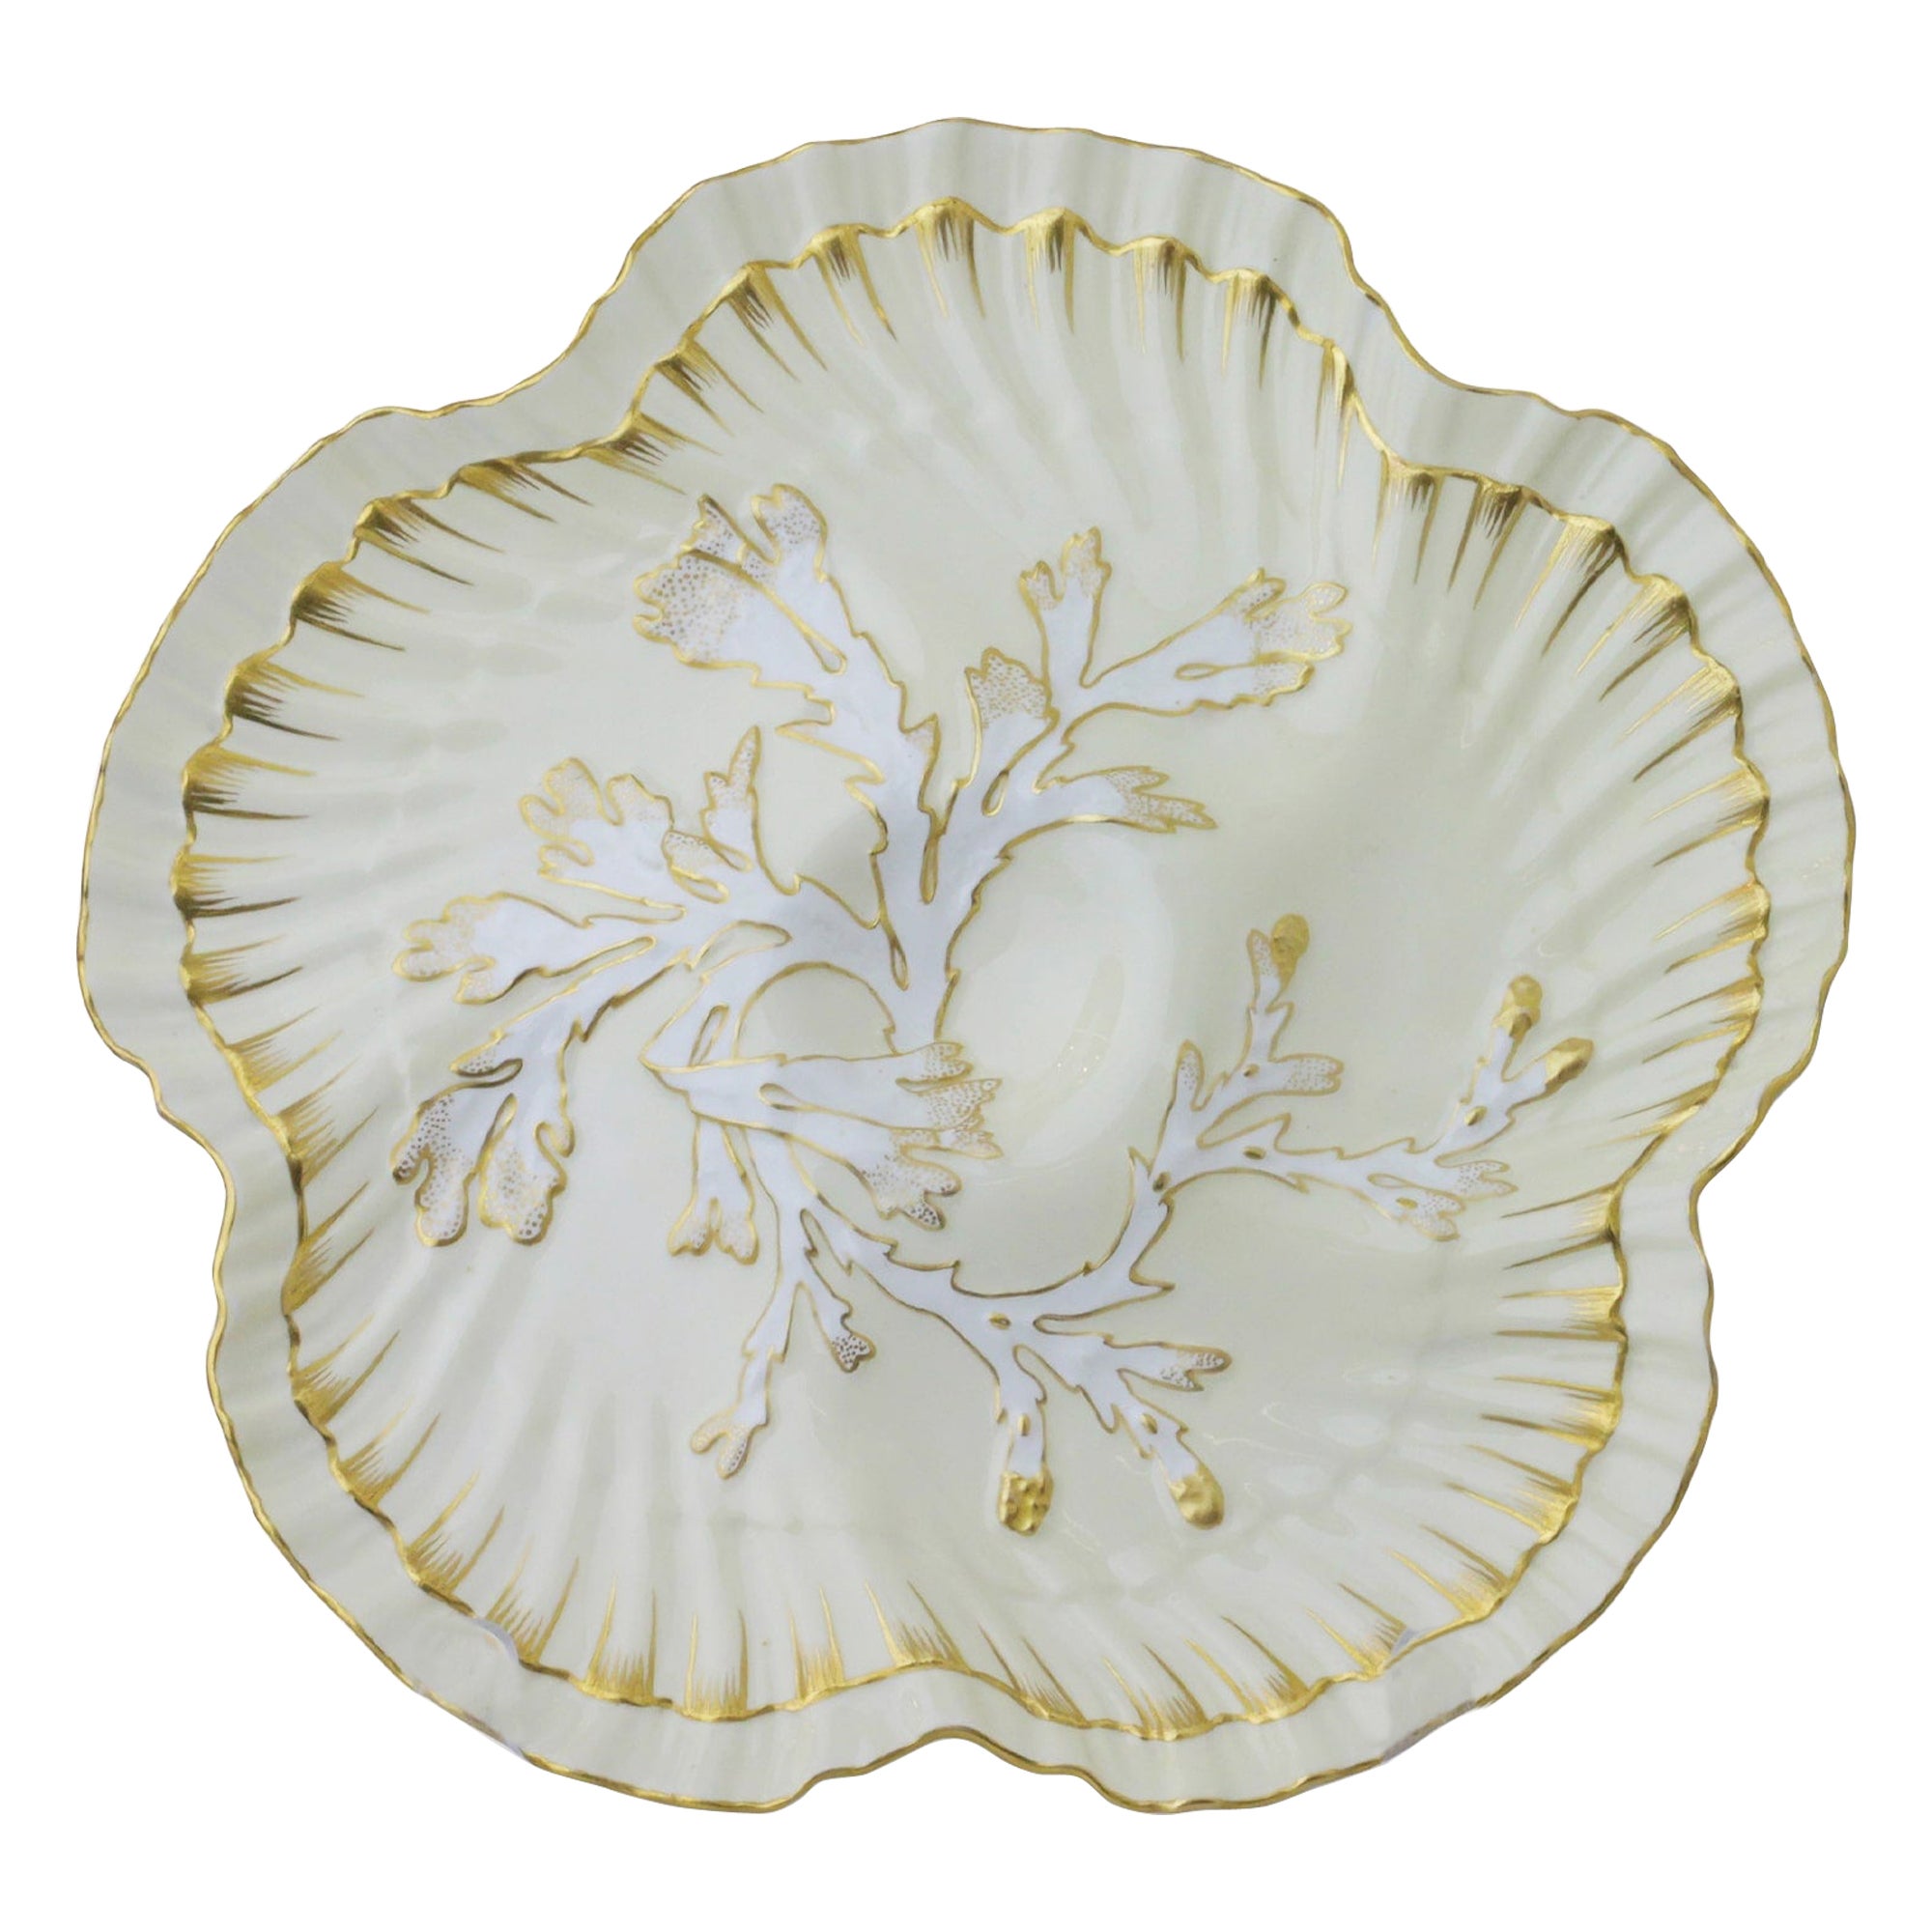 Brownfield's for Tiffany & Company Porcelain Oyster Plate For Sale